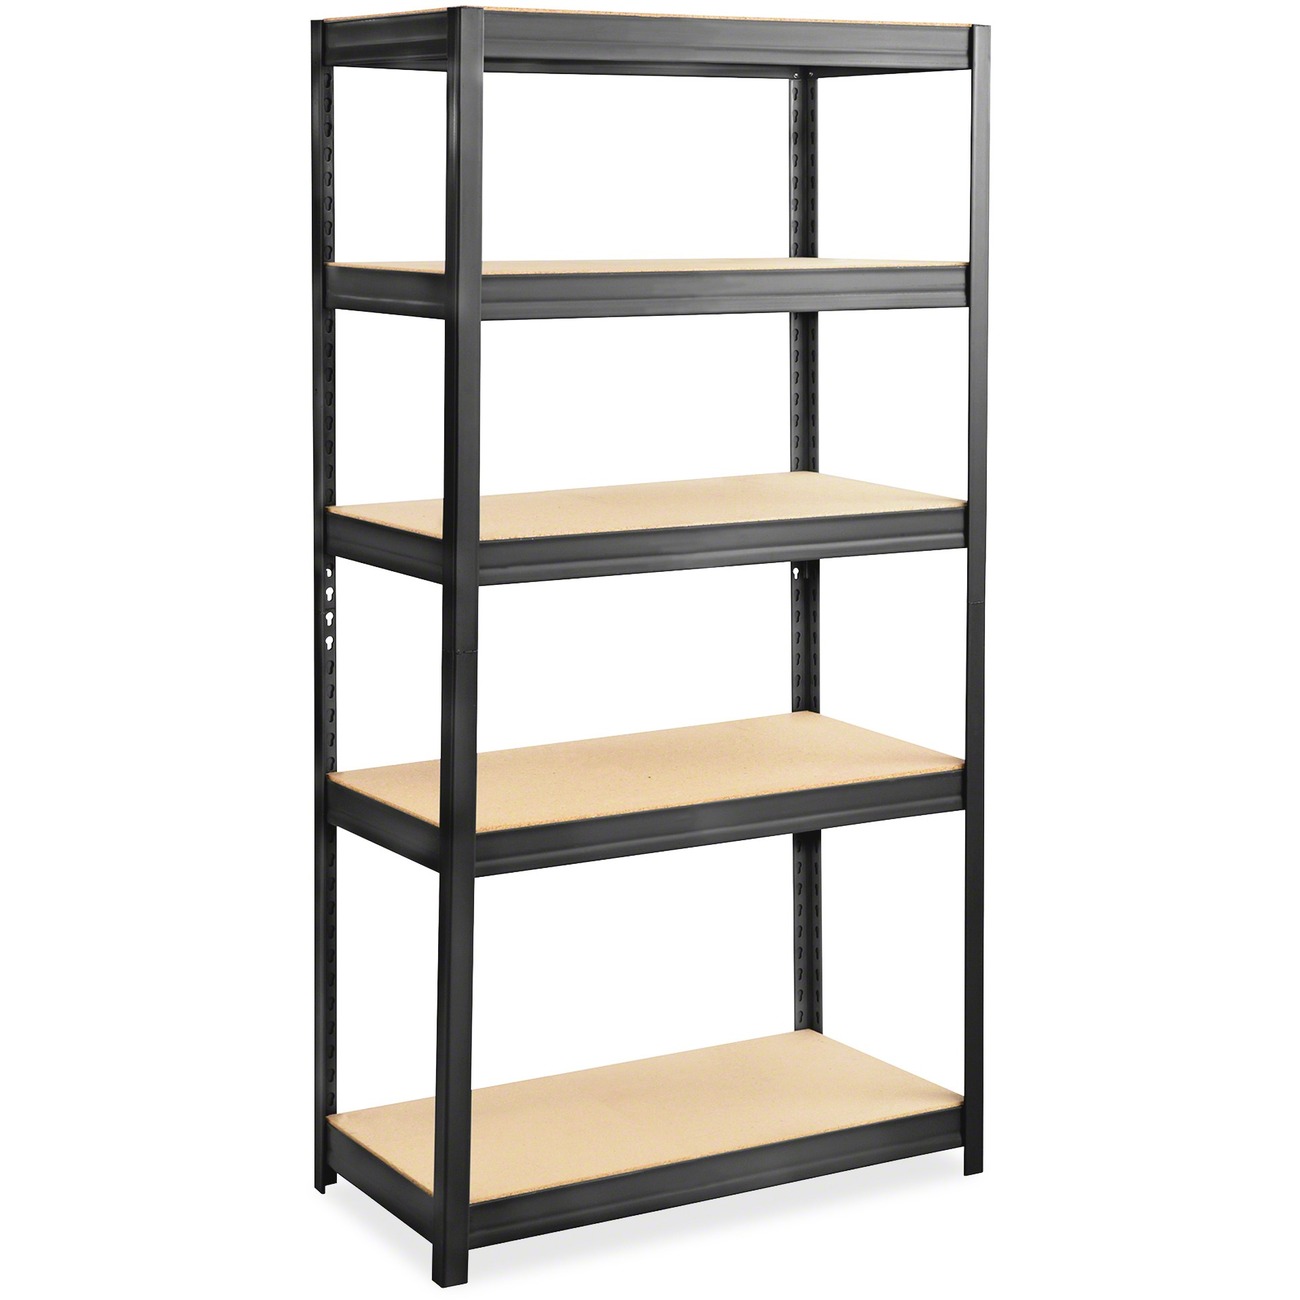 Safco Heavy-duty Boltless Steel Shelving Unit | Clark Office Products Inc